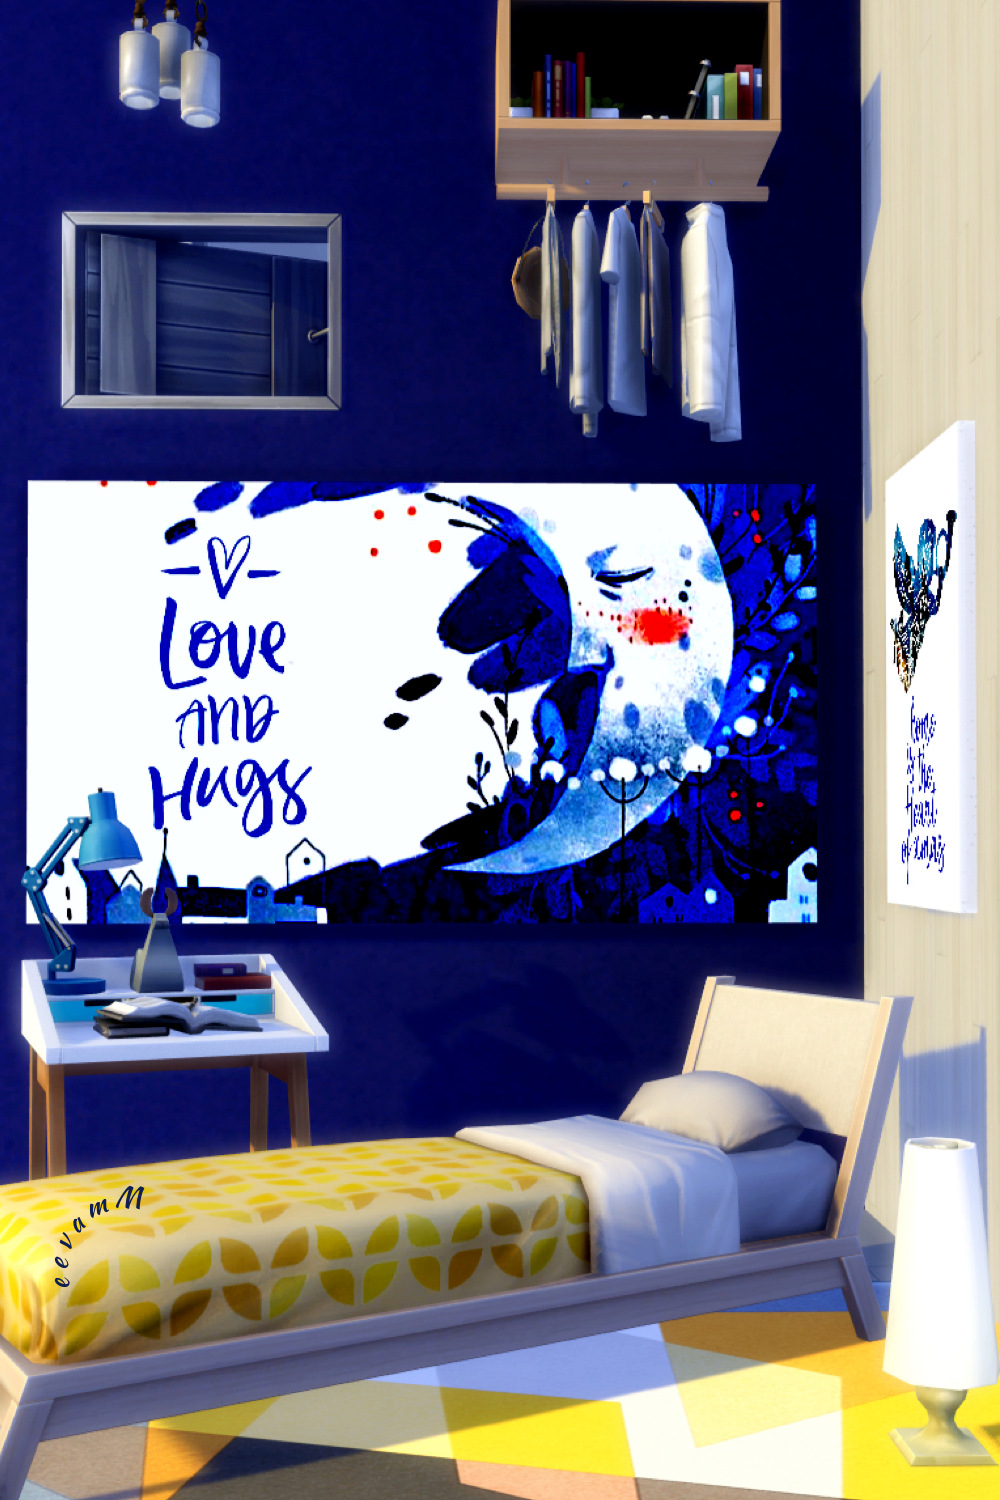 eevam; sims 4; the sims 4; sims 4 wall art; the sims 4 paintings; the sims 4 nocc; Ts4 Decor; eevamM; SFS;